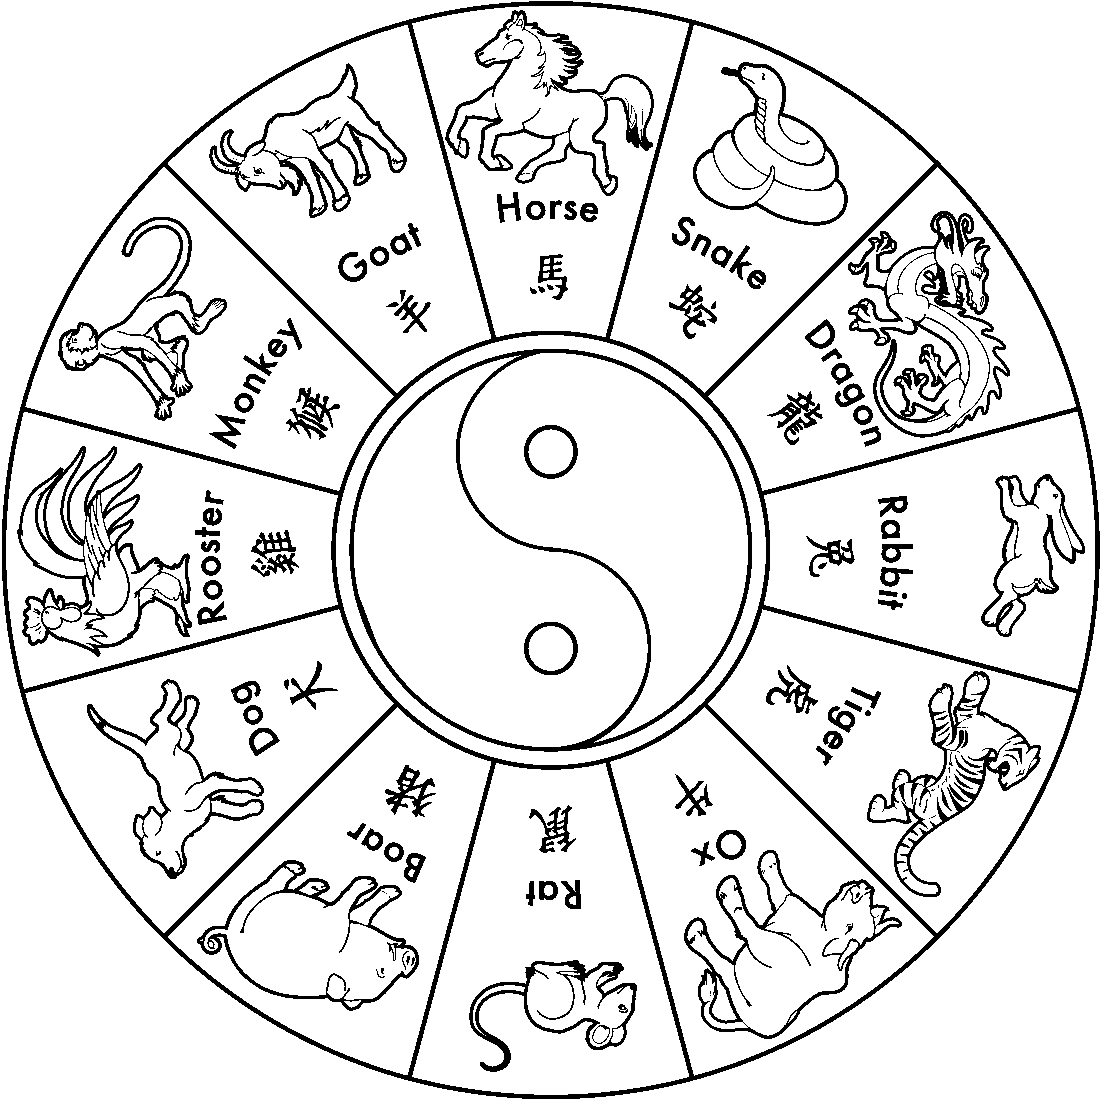 Free Chinese Zodiac Coloring Pages Download Free Chinese Zodiac Coloring Pages Png Images Free